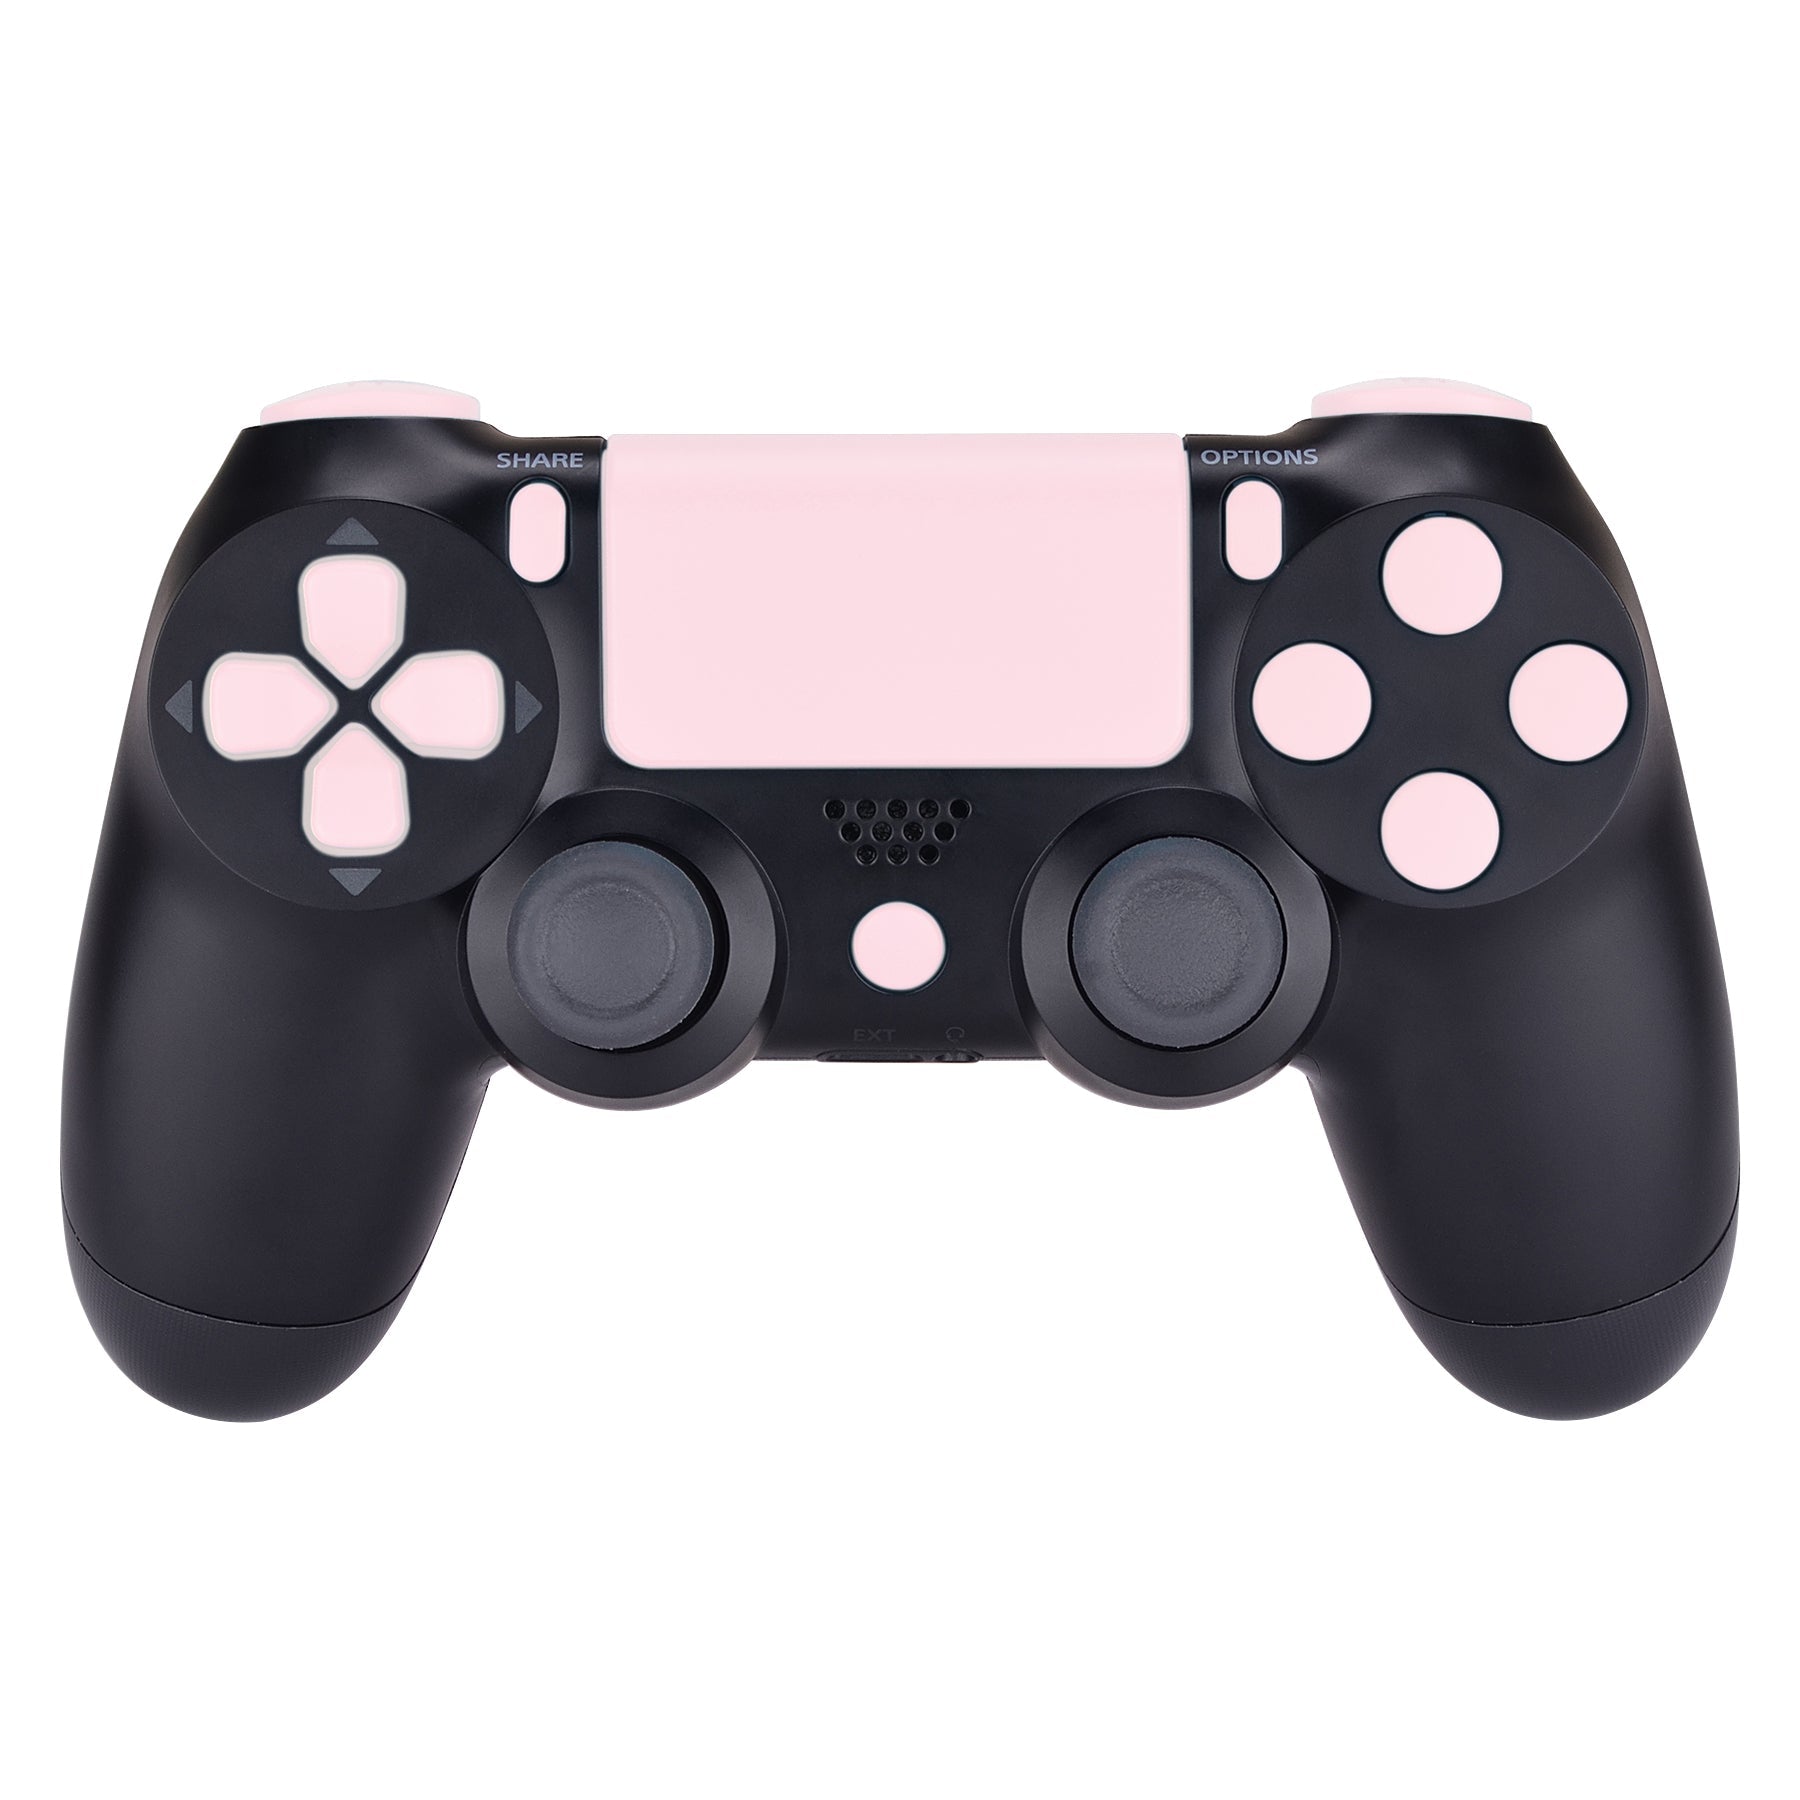 eXtremeRate Retail Replacement D-pad R1 L1 R2 L2 Triggers Touchpad Action Home Share Options Buttons, Cherry Blossoms Full Set Buttons Repair Kits with Tool for ps4 Slim ps4 Pro CUH-ZCT2 Controller - SP4J0409